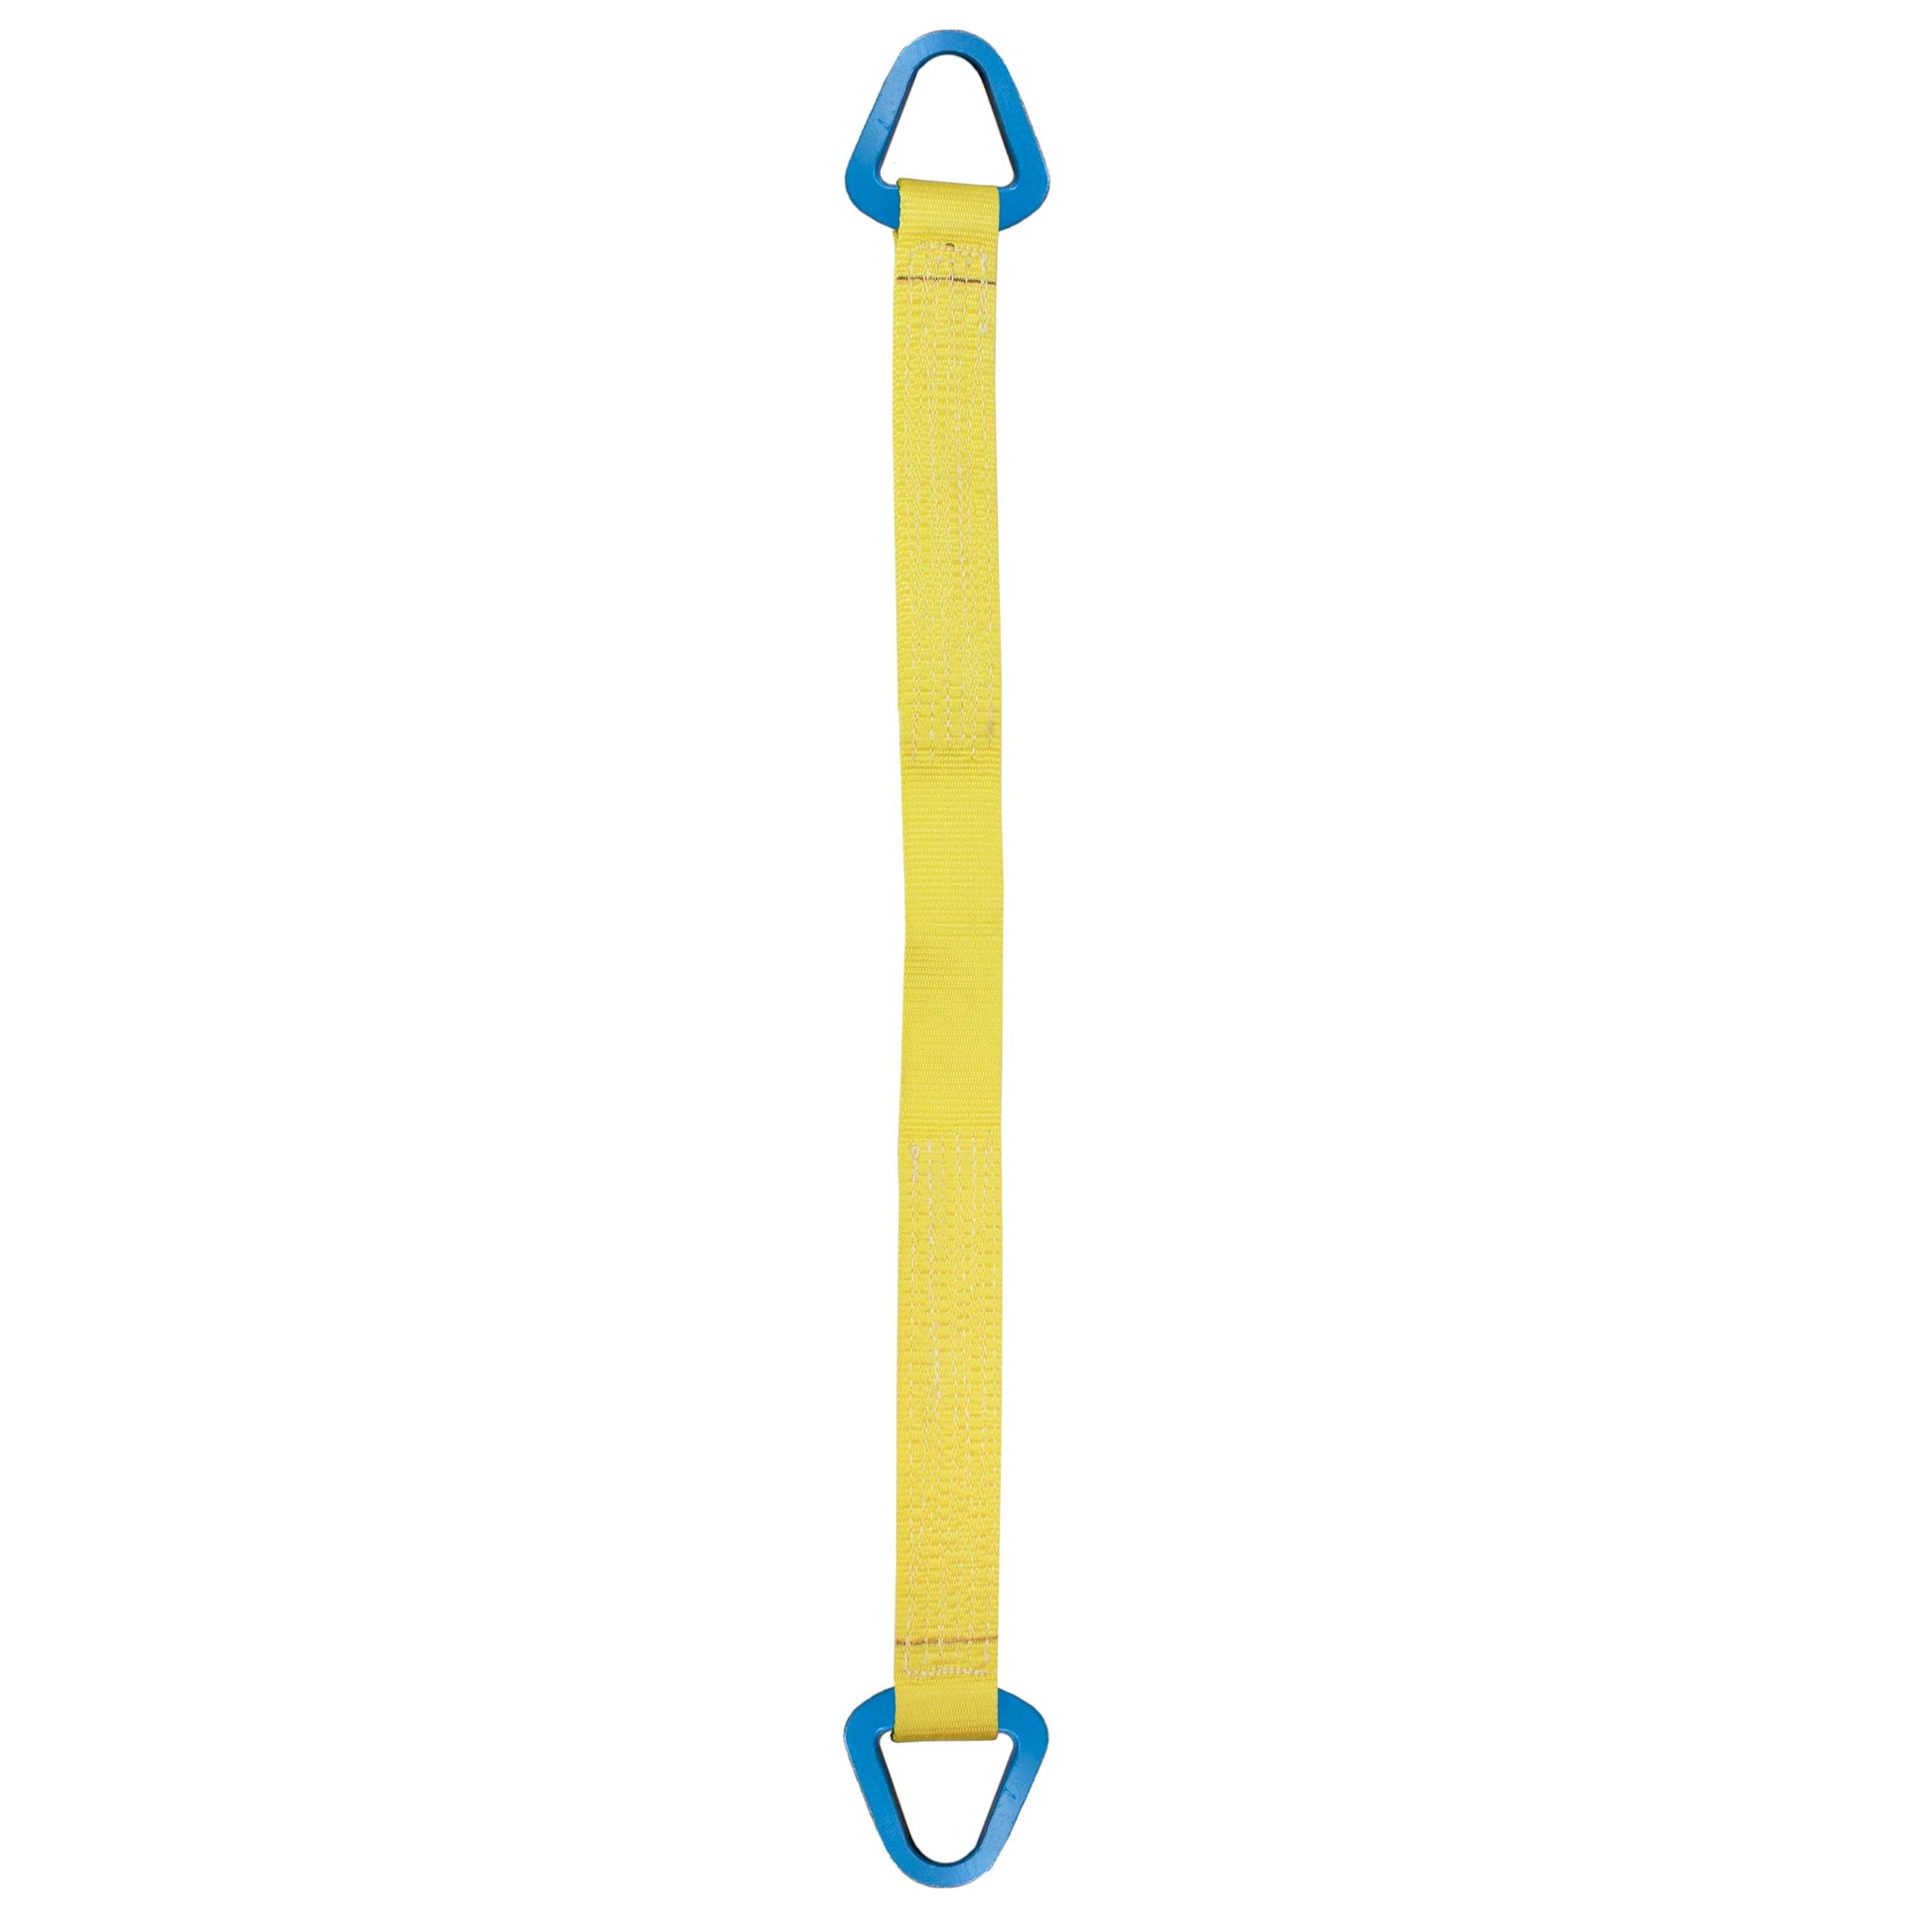 Nylon Lifting Sling Triangle 8 inch x 16 foot 2ply image 1 of 2